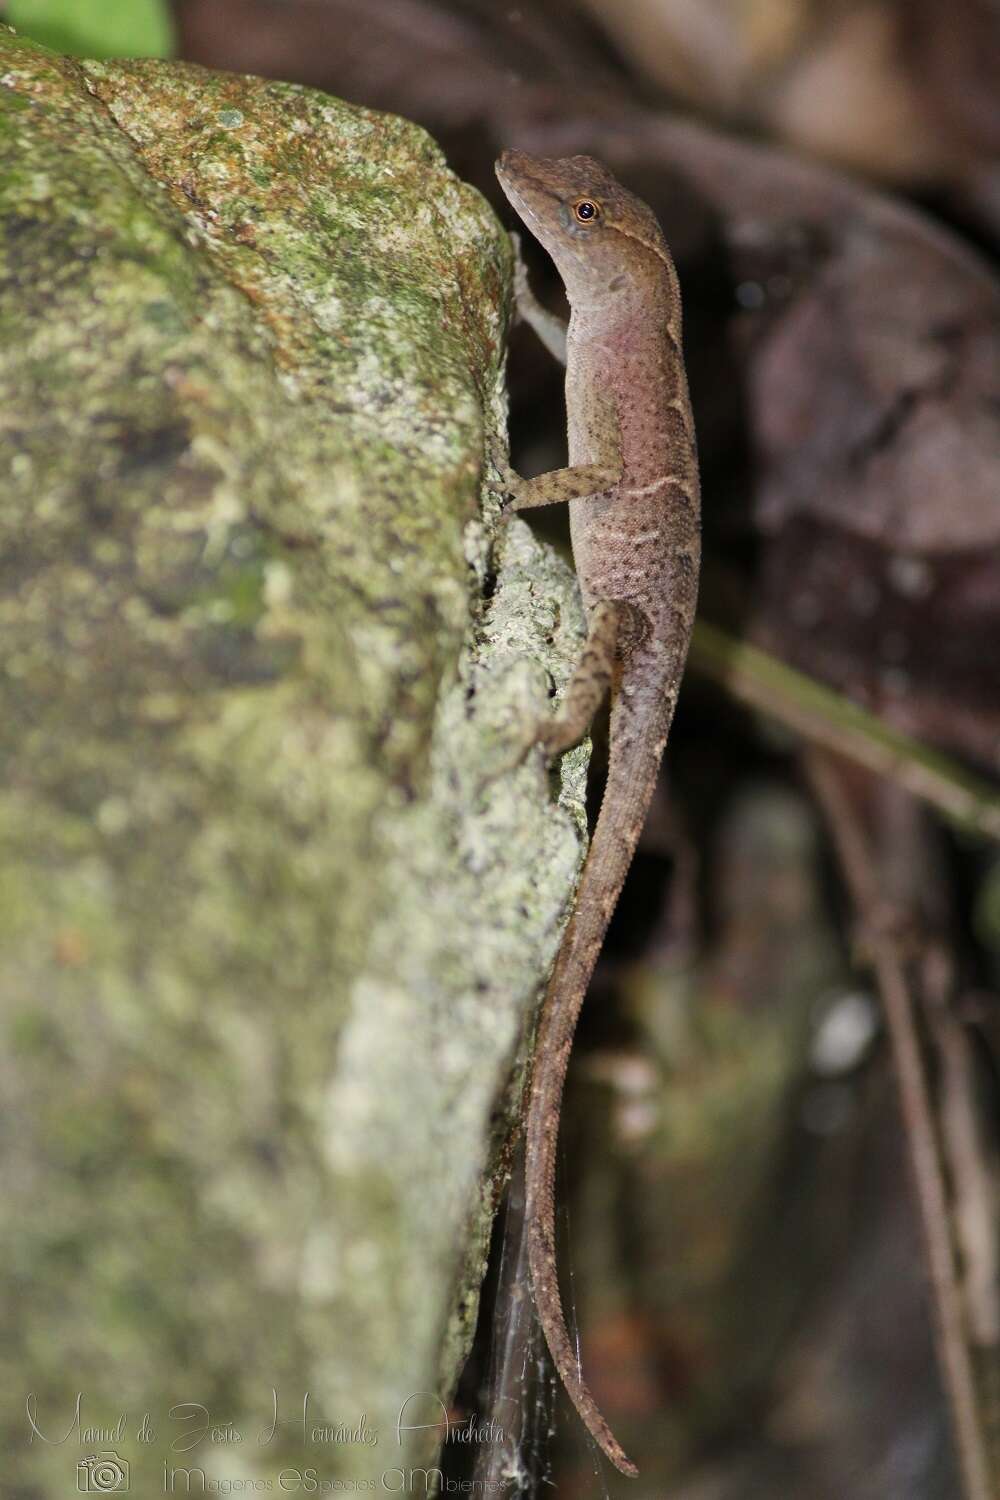 Image of Lesser Scaly Anole